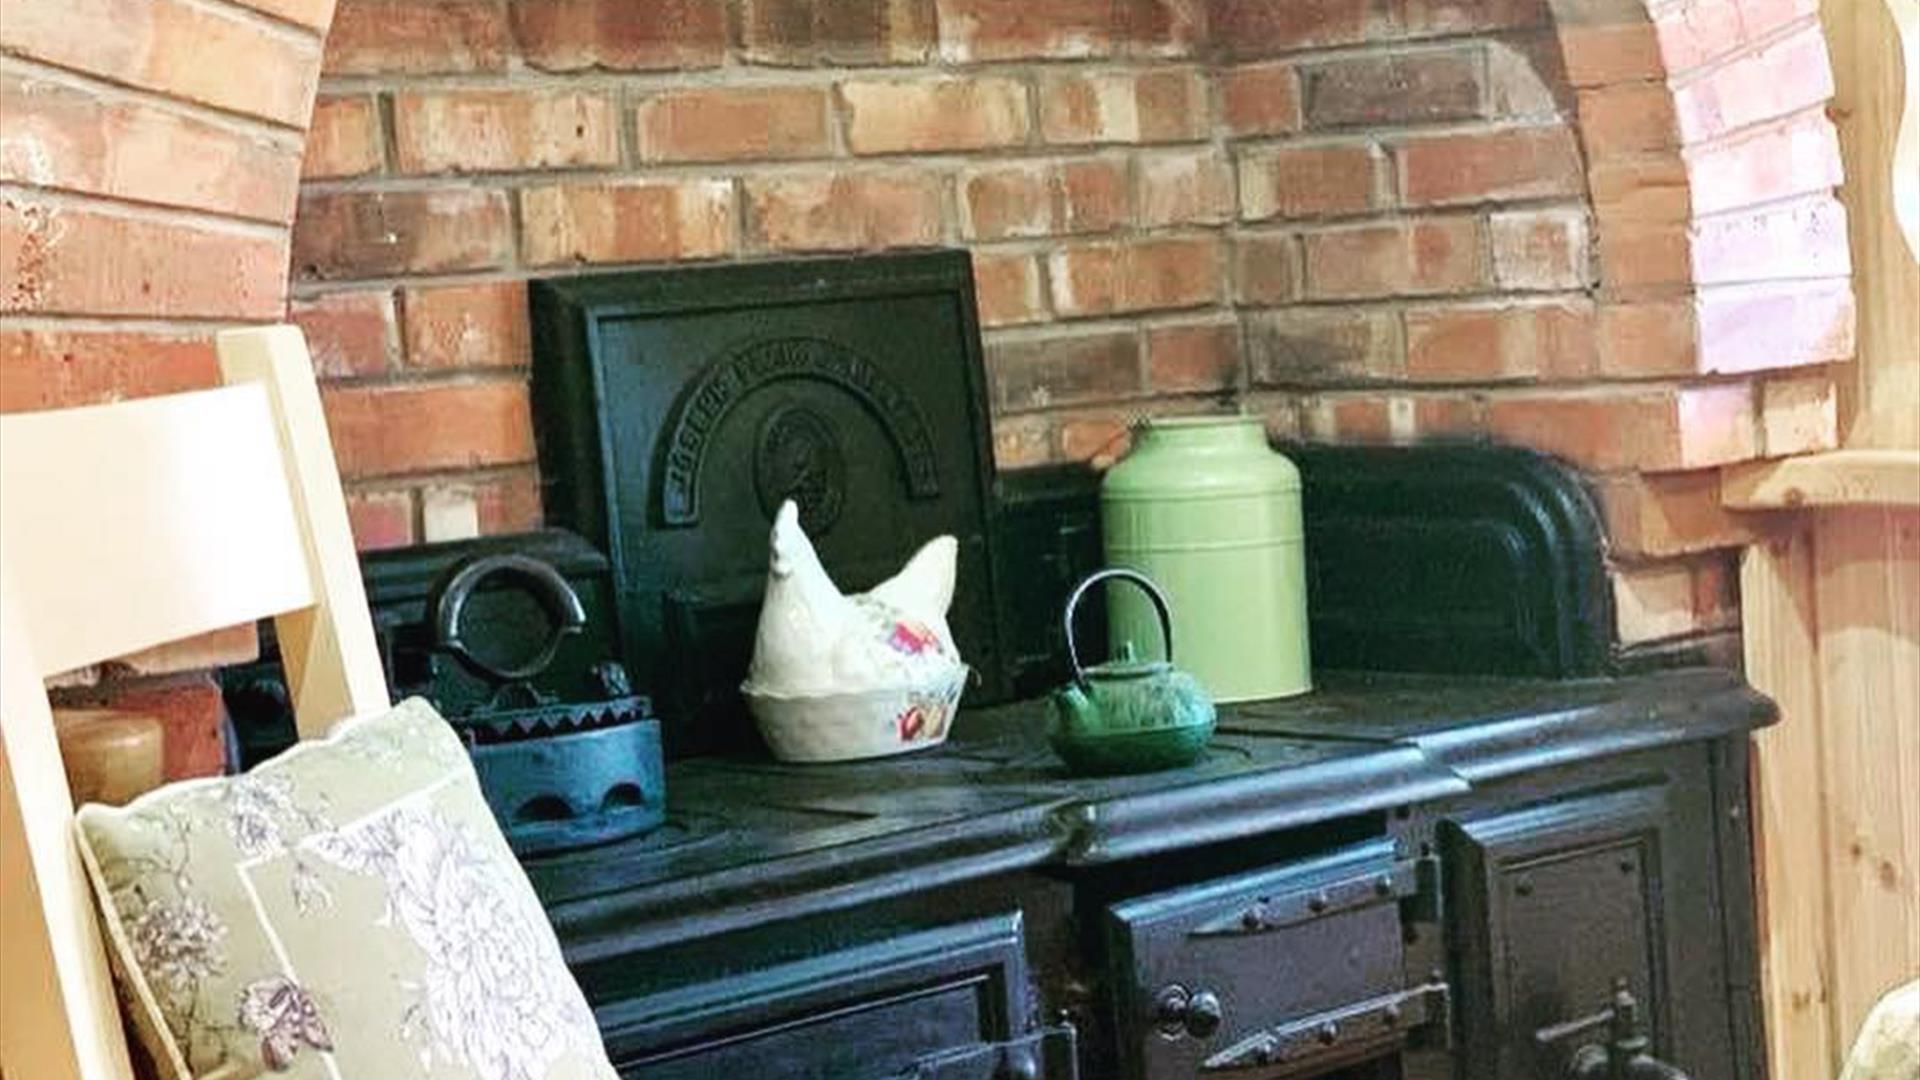 Image shows Aga in kitchen area with explosed brickwork surrounding it